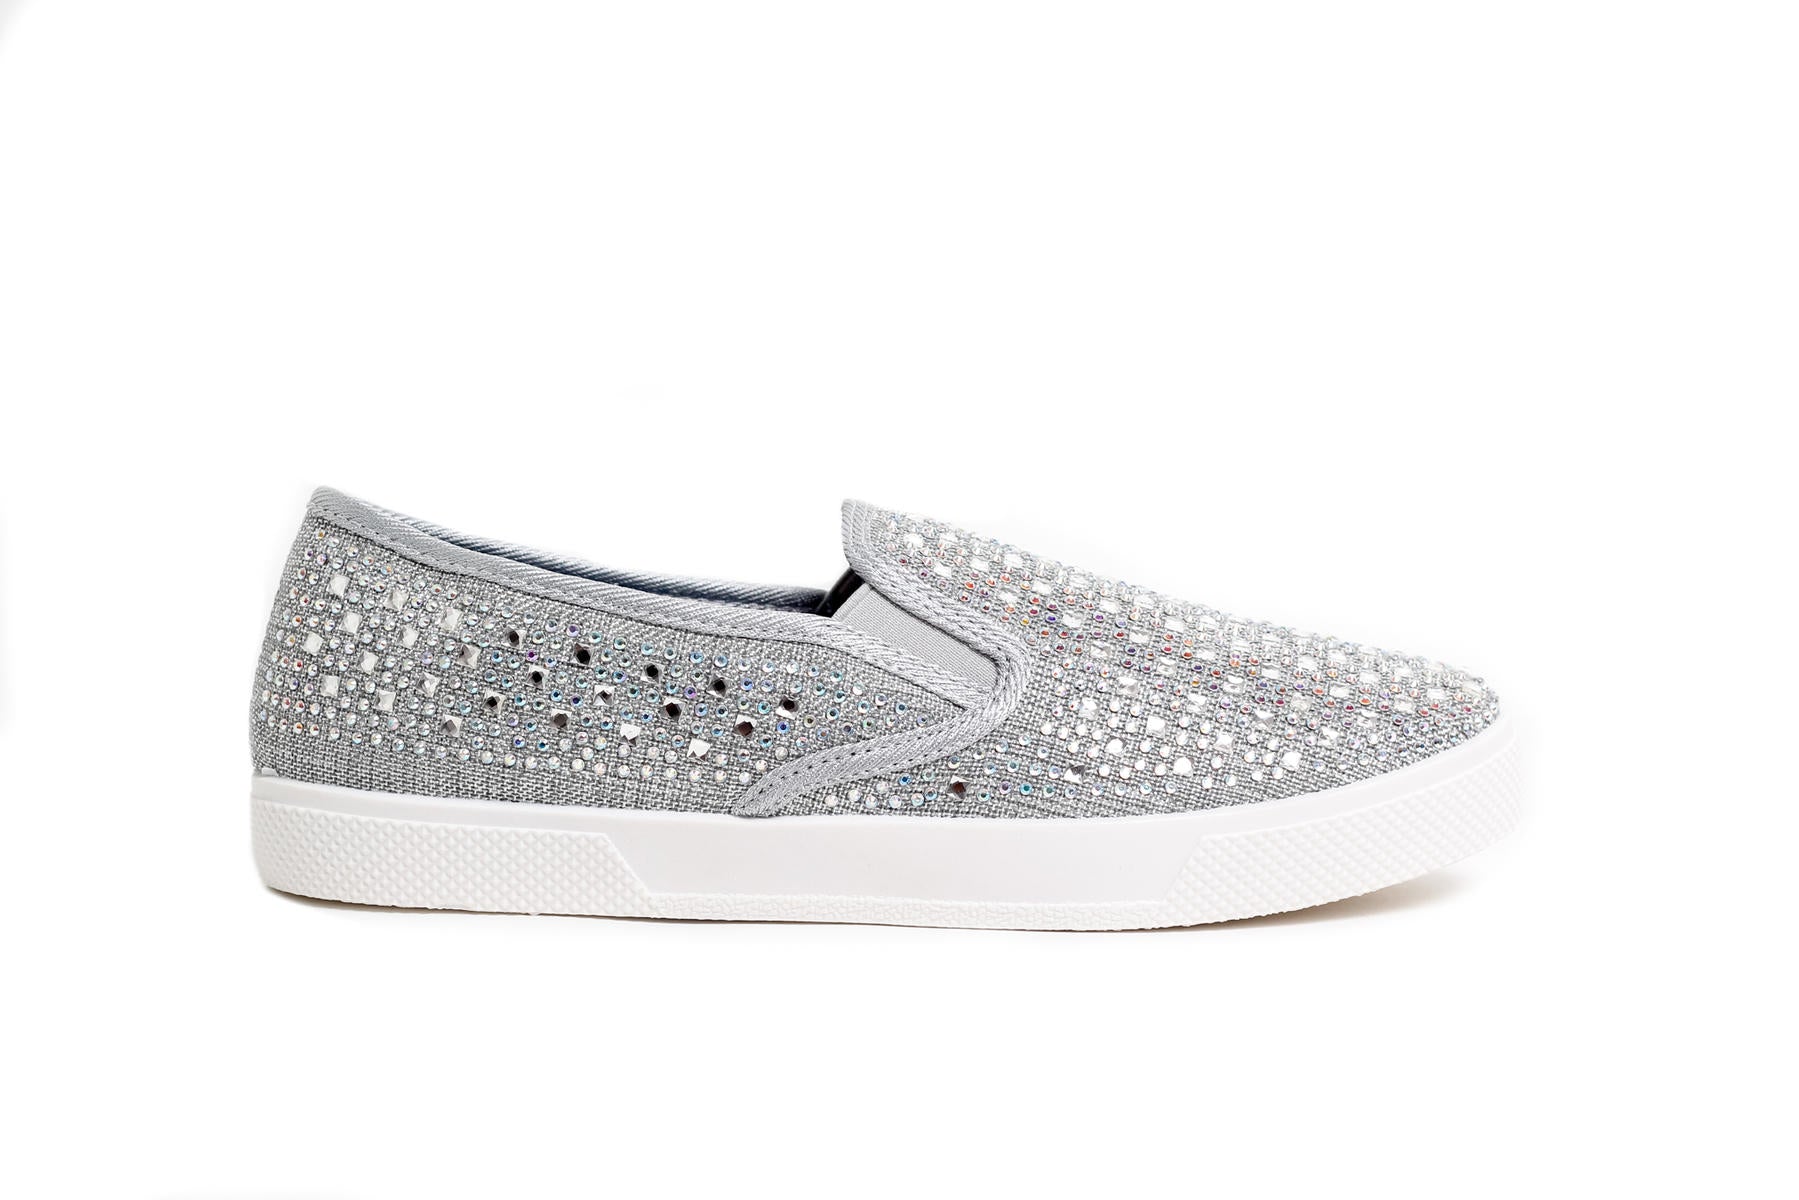 Peyton Slip on Sneakers Prom Shoes Crystal Embellished Canvas Flat Bli ...